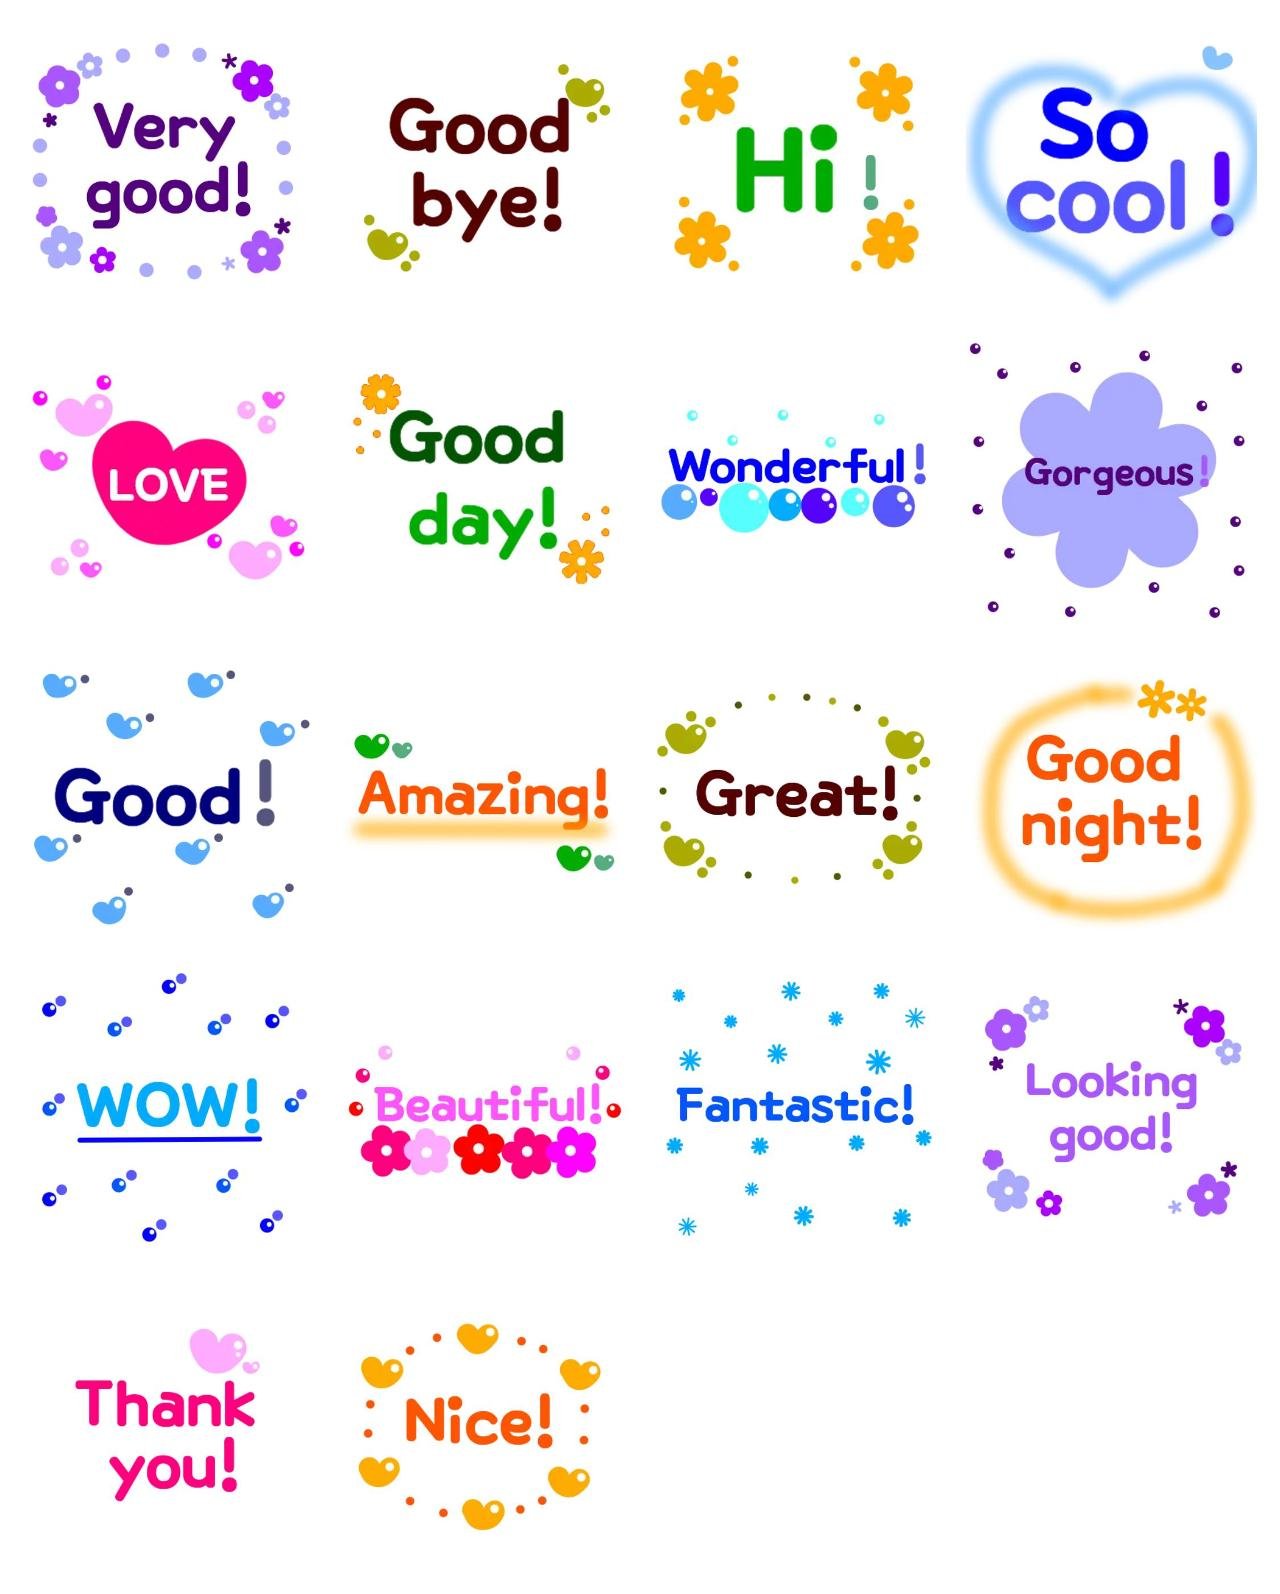 Good Phrases,Romance sticker pack for Whatsapp, Telegram, Signal, and others chatting and message apps